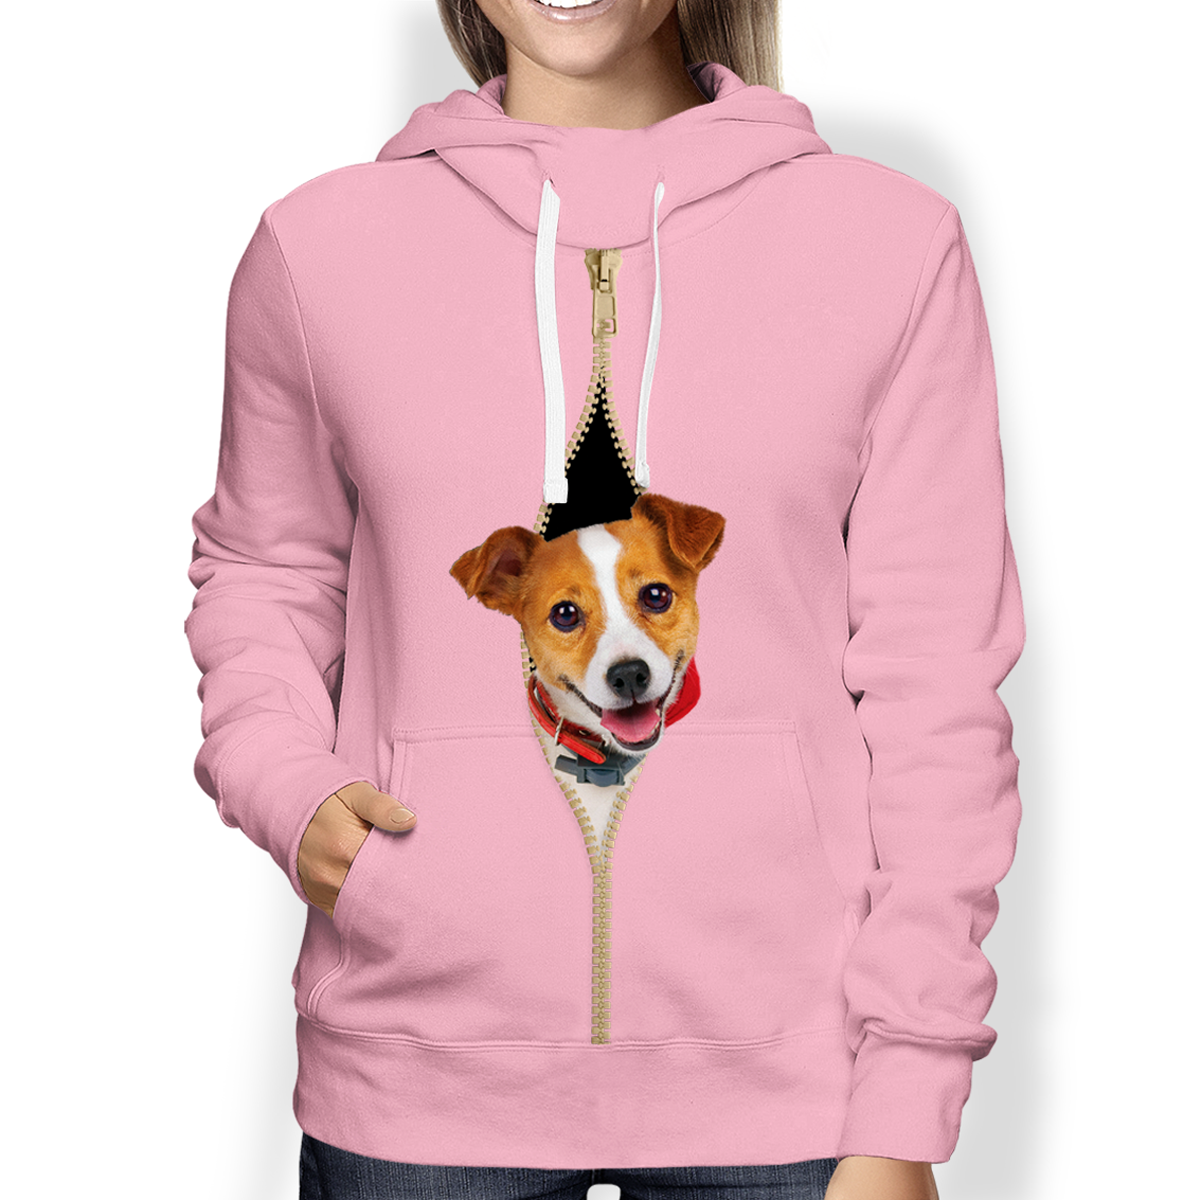 I'm With You - Personalized Hoodie With Your Pet's Photo